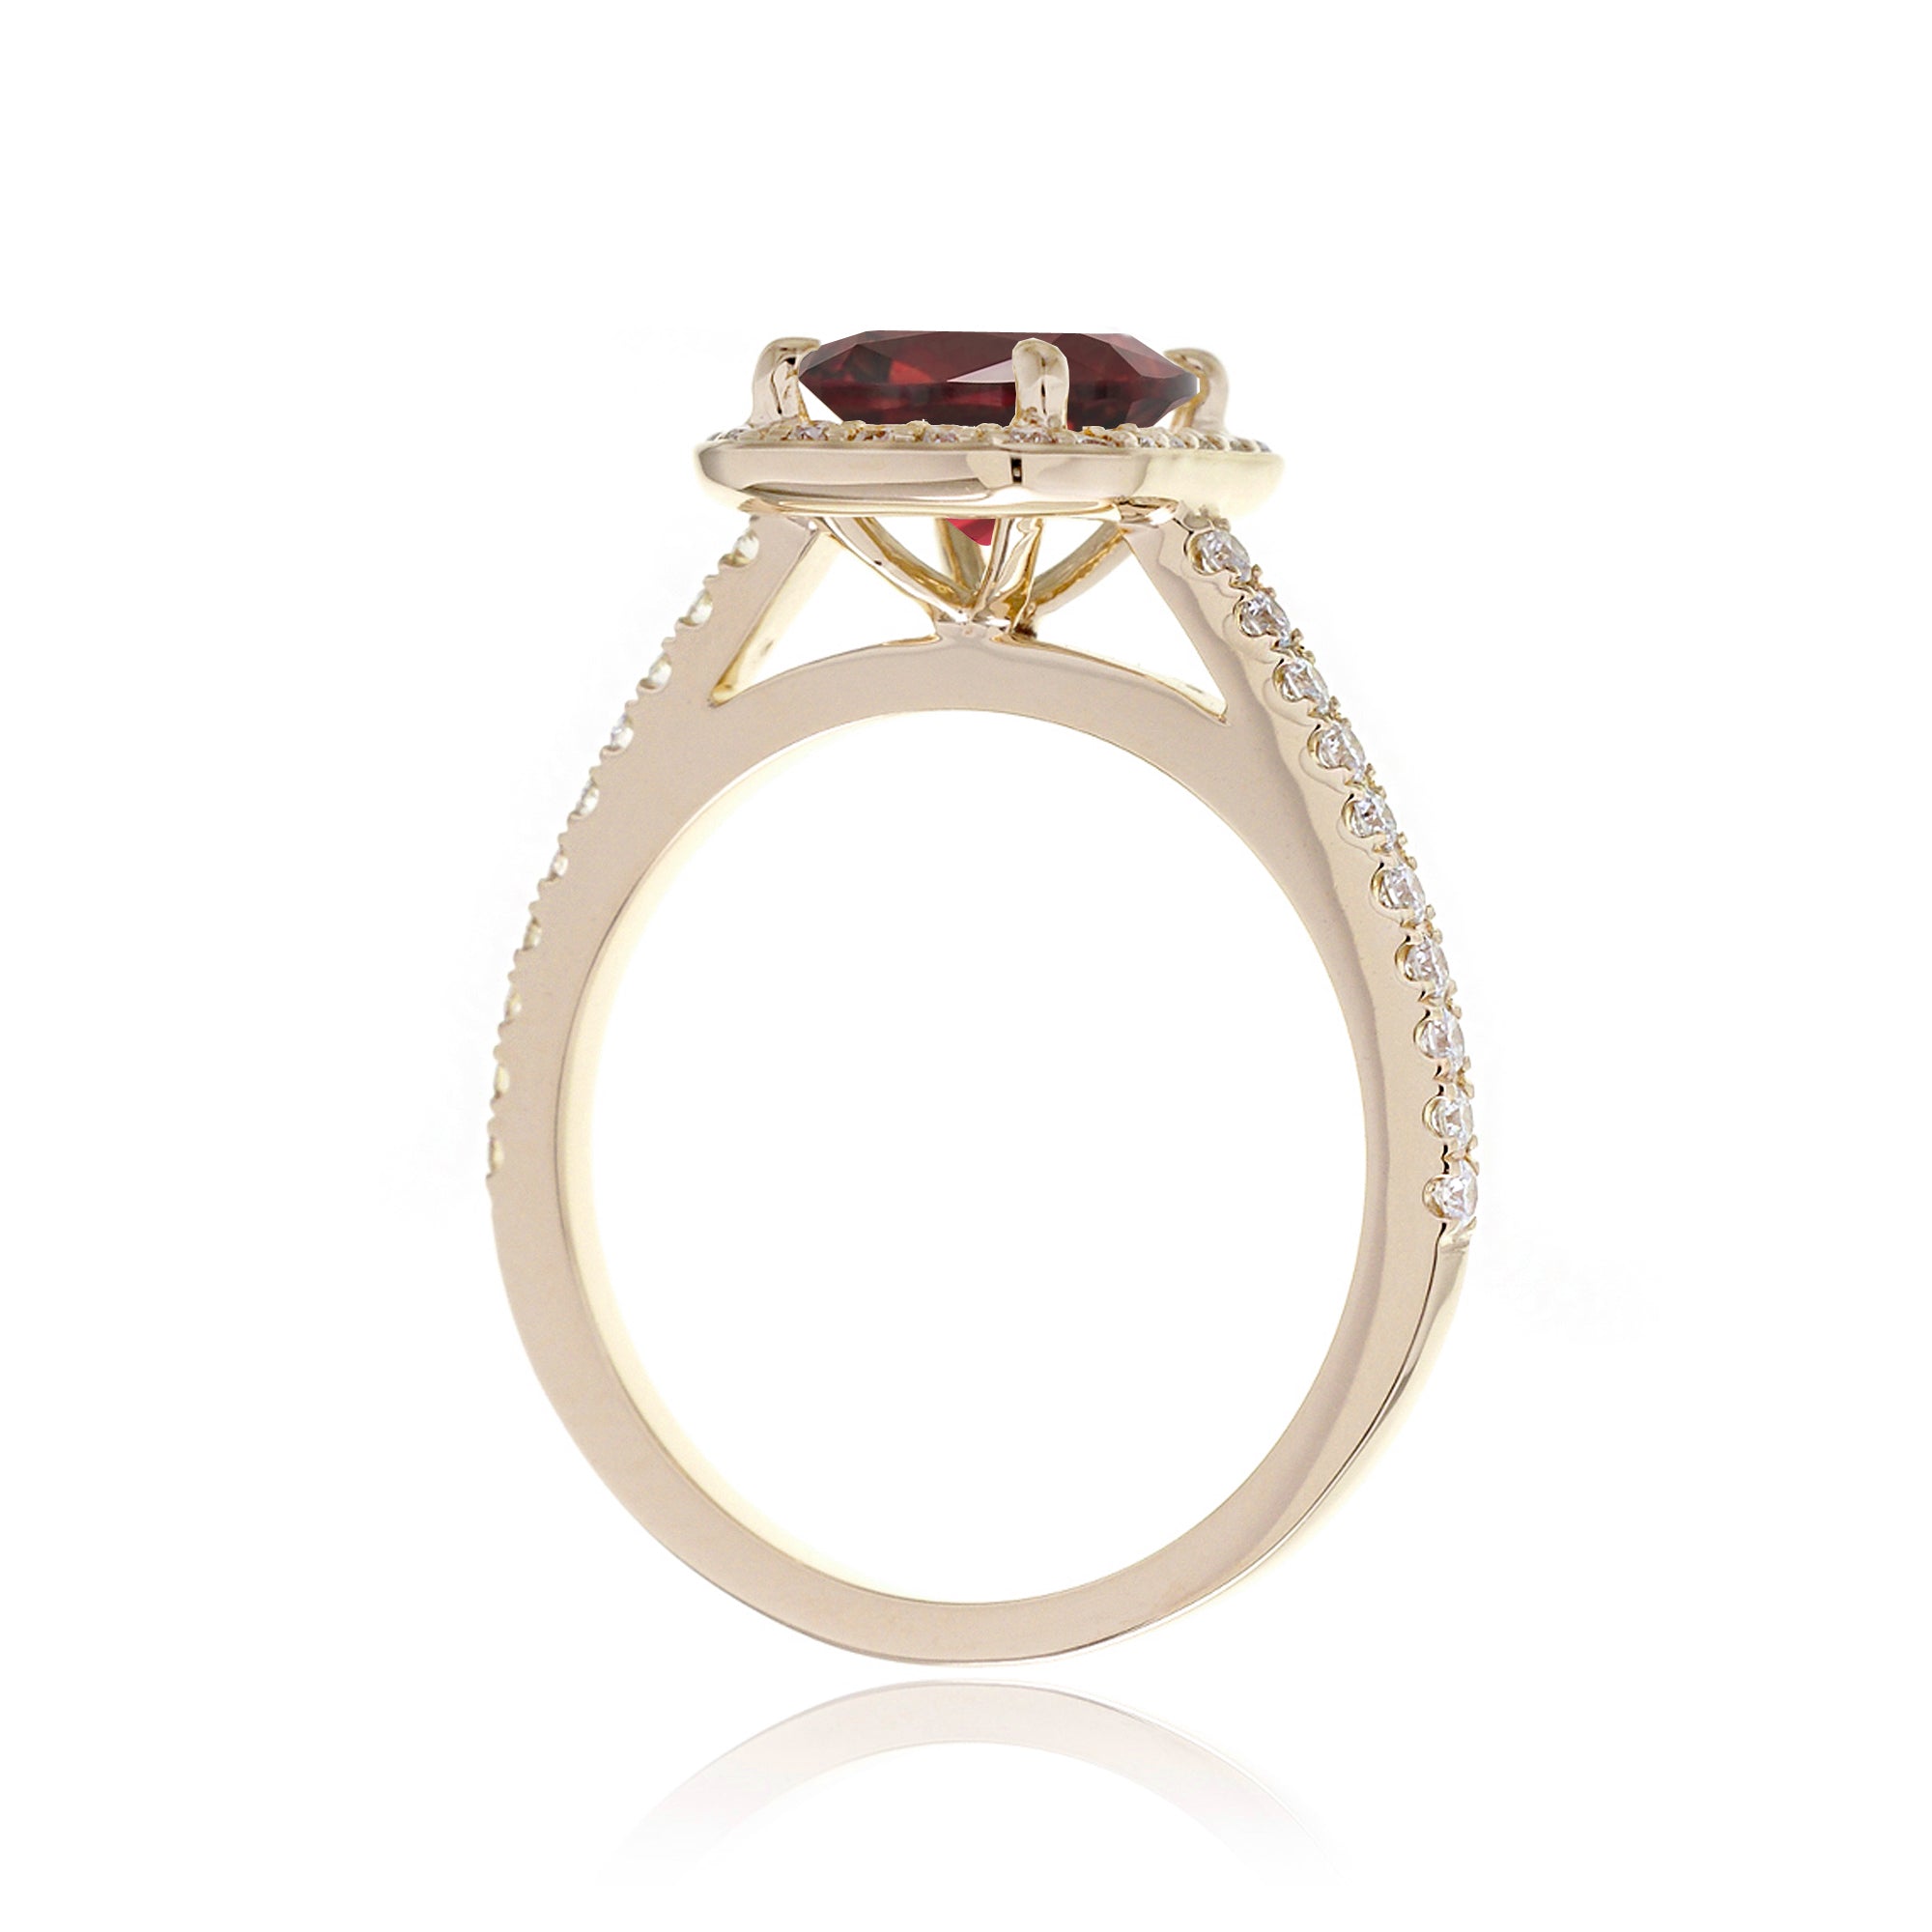 Cushion lab-grown ruby diamond halo cathedral engagement ring - the Steffy yellow gold